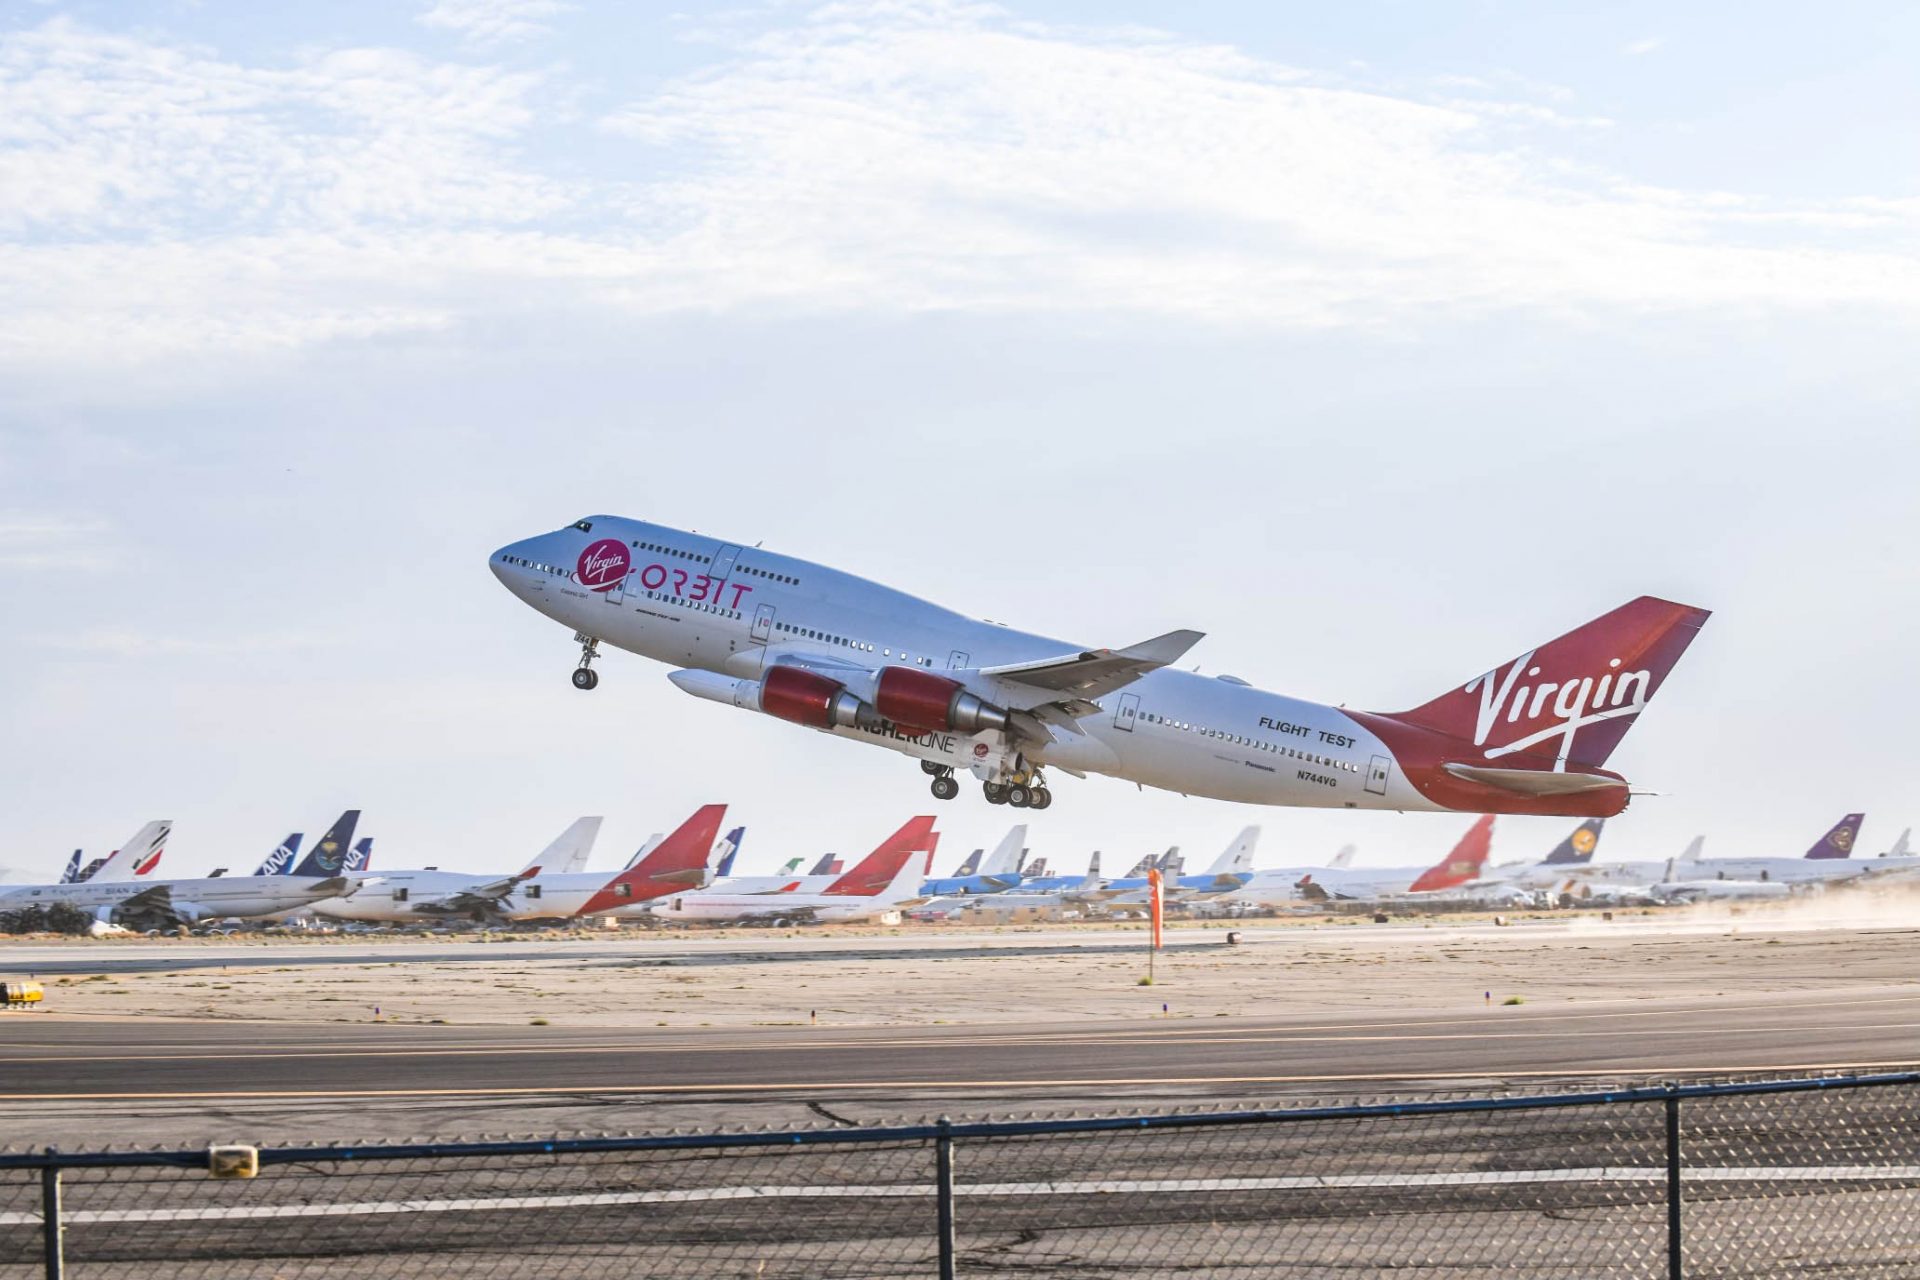 Virgin Orbit gearing up for autumn commence and a busy 2022